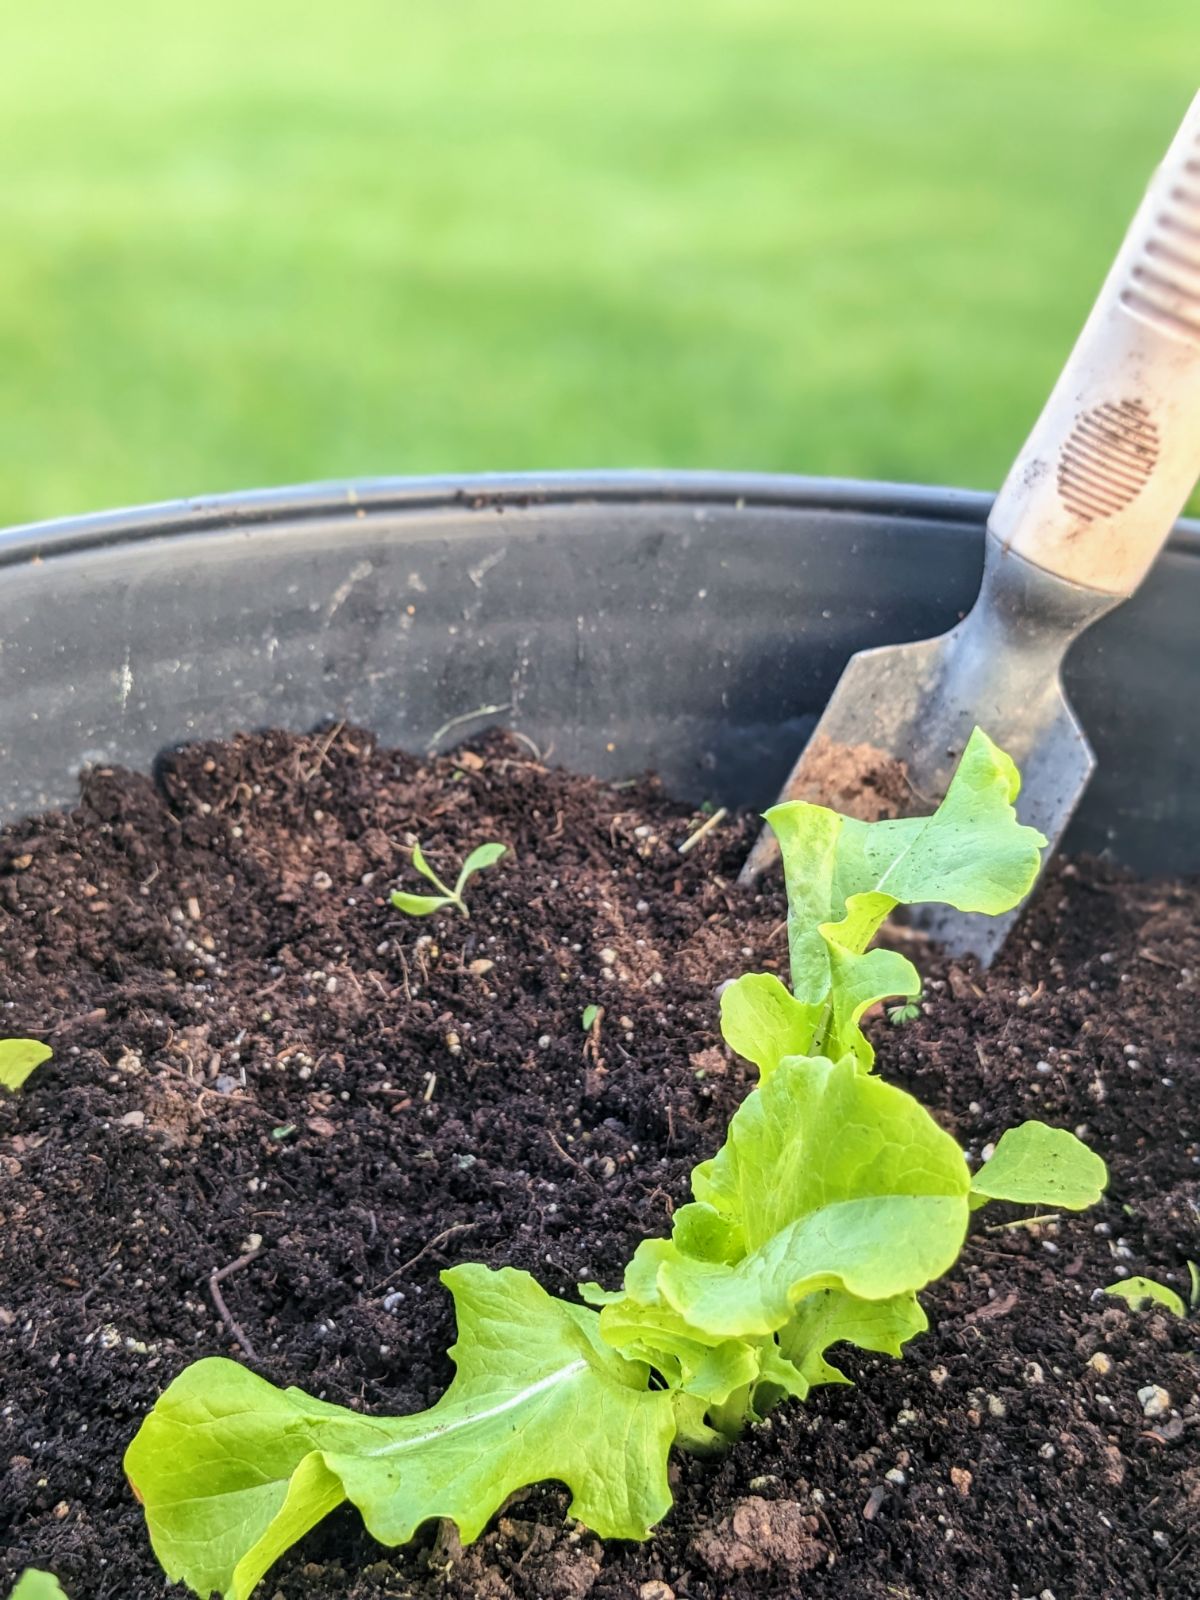 Growing leaf lettuce in containers - green lettuce and a hand spade in a pot of soil